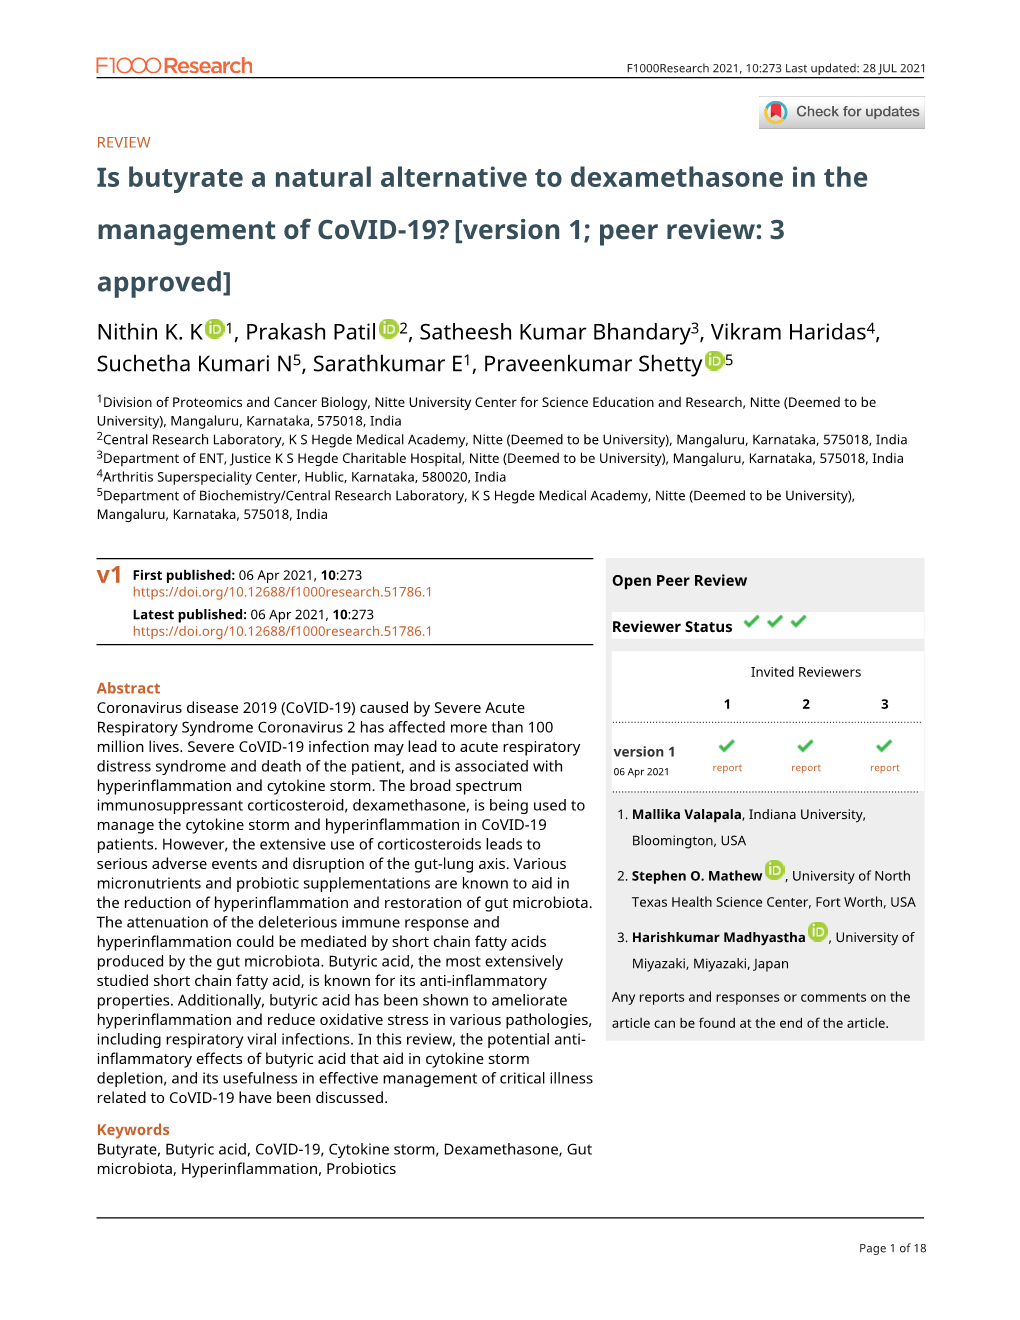 Is Butyrate a Natural Alternative to Dexamethasone in the Management of Covid-19? [Version 1; Peer Review: 3 Approved]